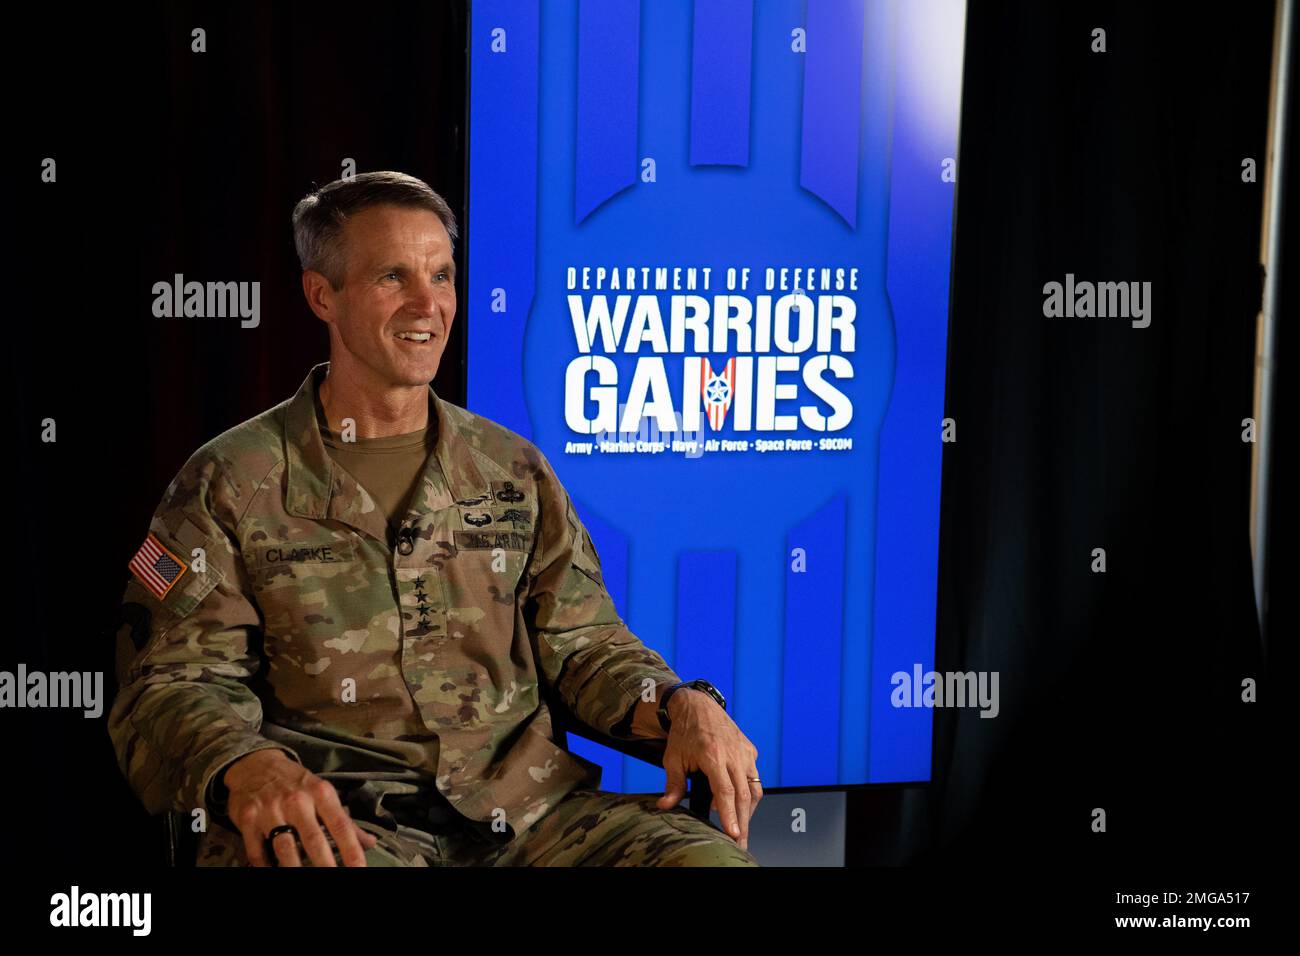 U.S. Army General Richard Clarke, commander, United States Special Operations Command (SOCOM) is interviewed during the DoD Warrior Games on Aug. 23, 2022 at the ESPN Wide World of Sports Complex in Orlando, Florida. General Clarke is making his last visit as SOCOM commander to the DoD Warrior Games to show his support for Team SOCOM and all participants in the games before he relinquishes command on Aug. 30, 2022. (Photo by U.S. Marine Corps Gunnery Sgt. Eric L. Alabiso II) Stock Photo